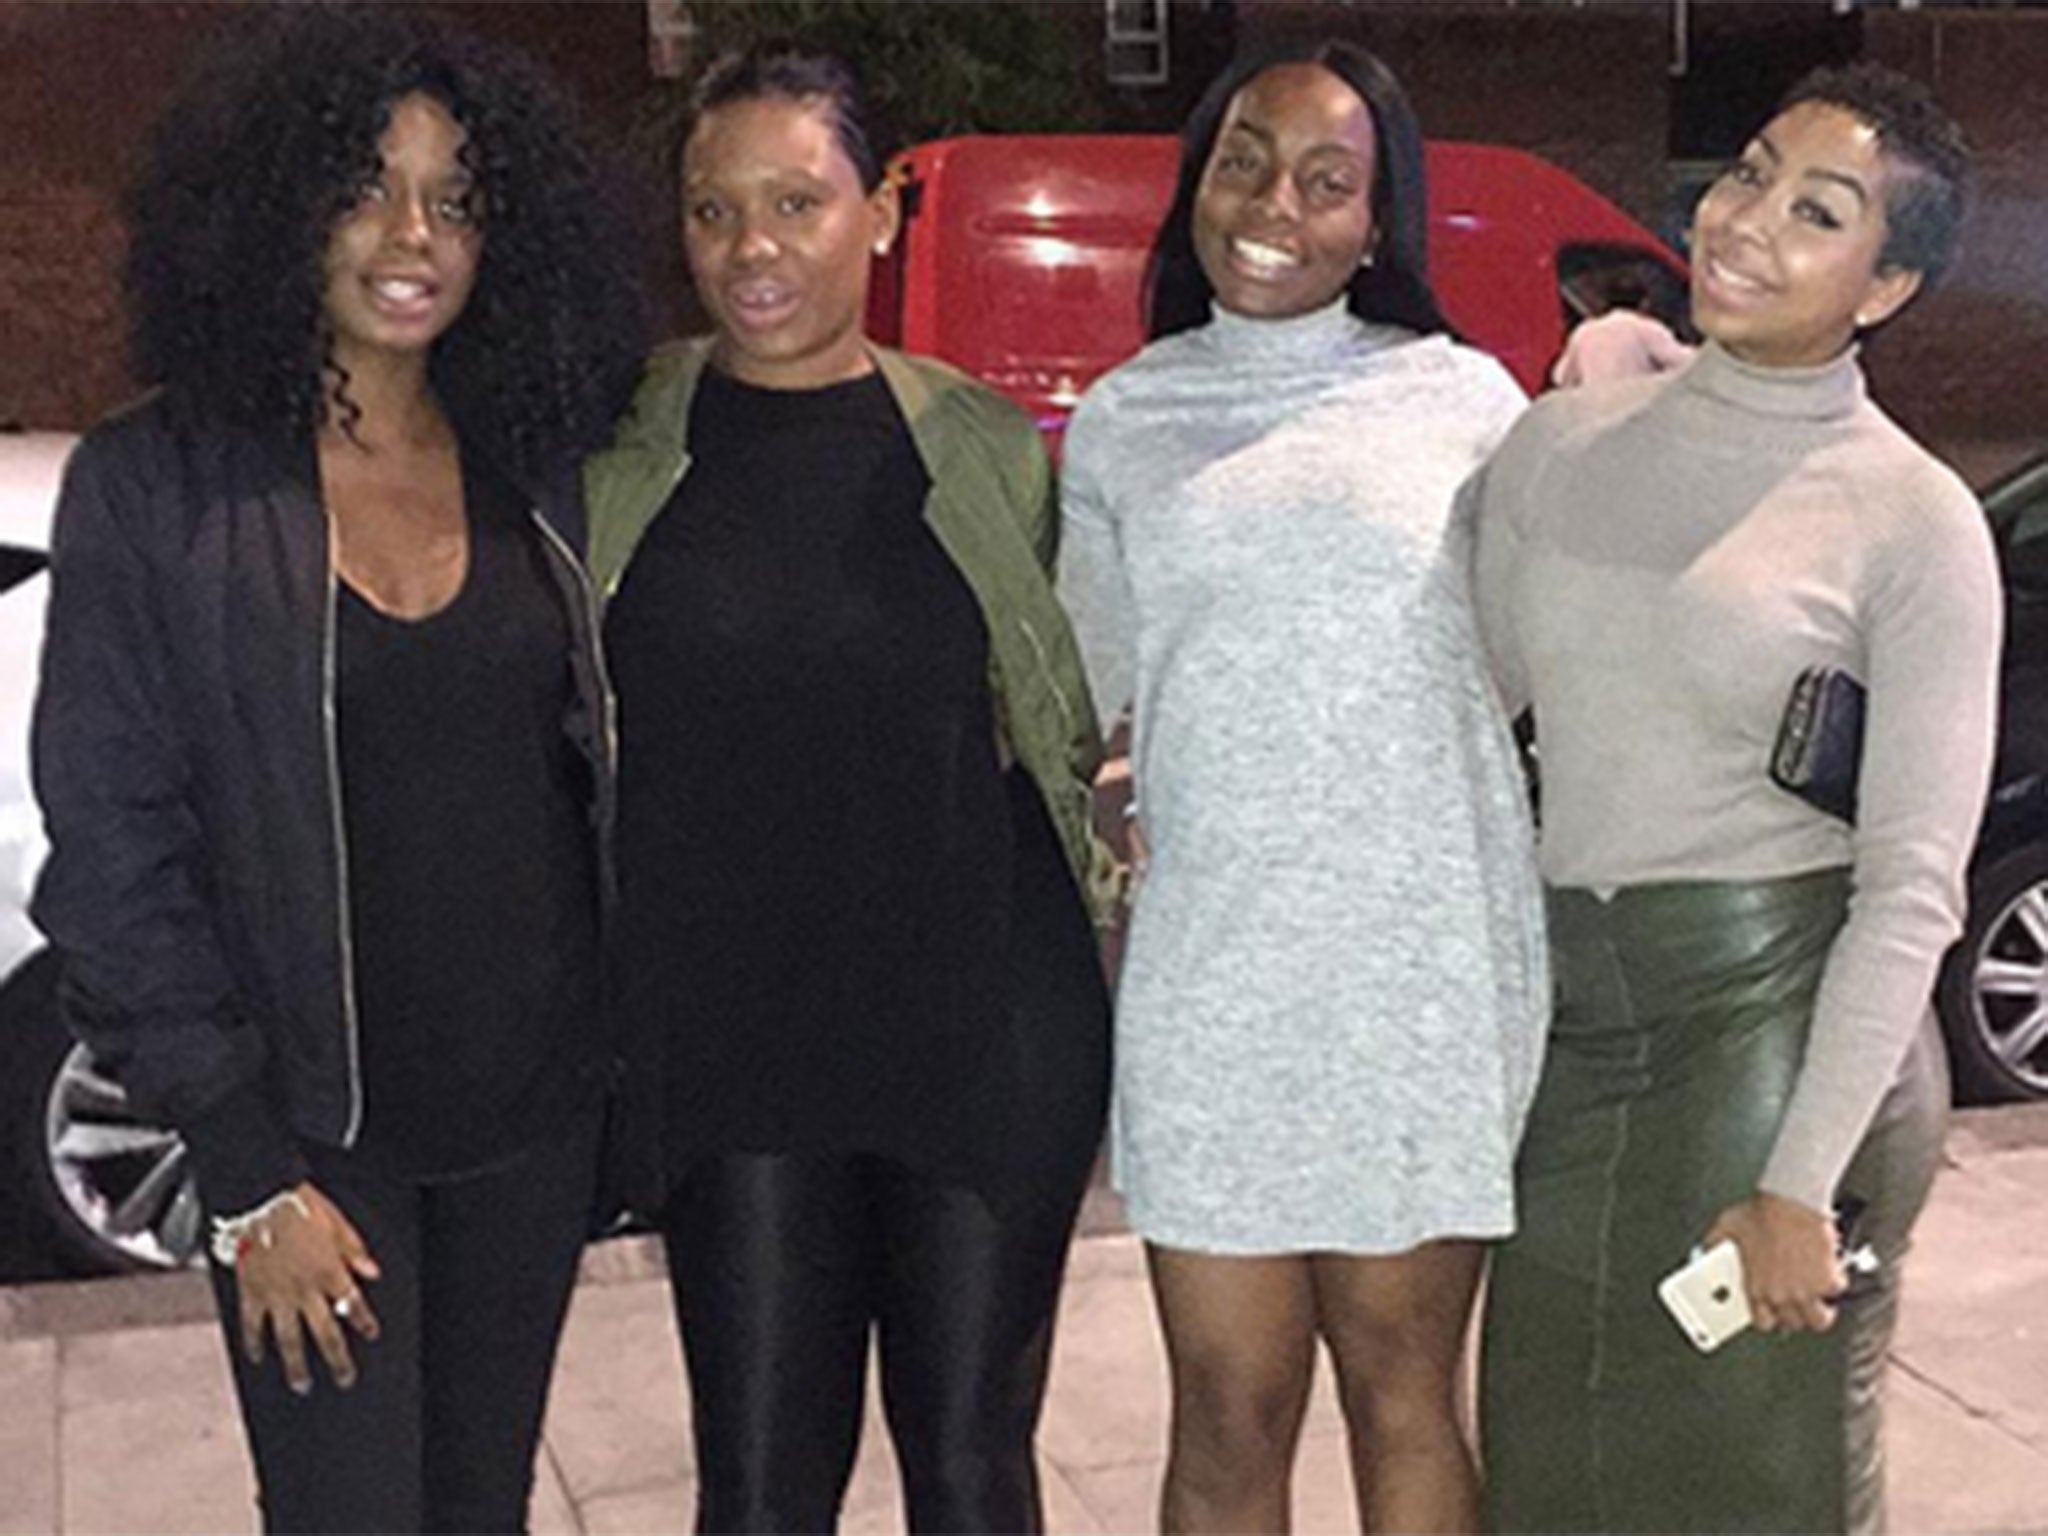 DSTRKT has been accused of racism after refusing entry to the actress and presenter Zalika Miller and three of her friends on Saturday.